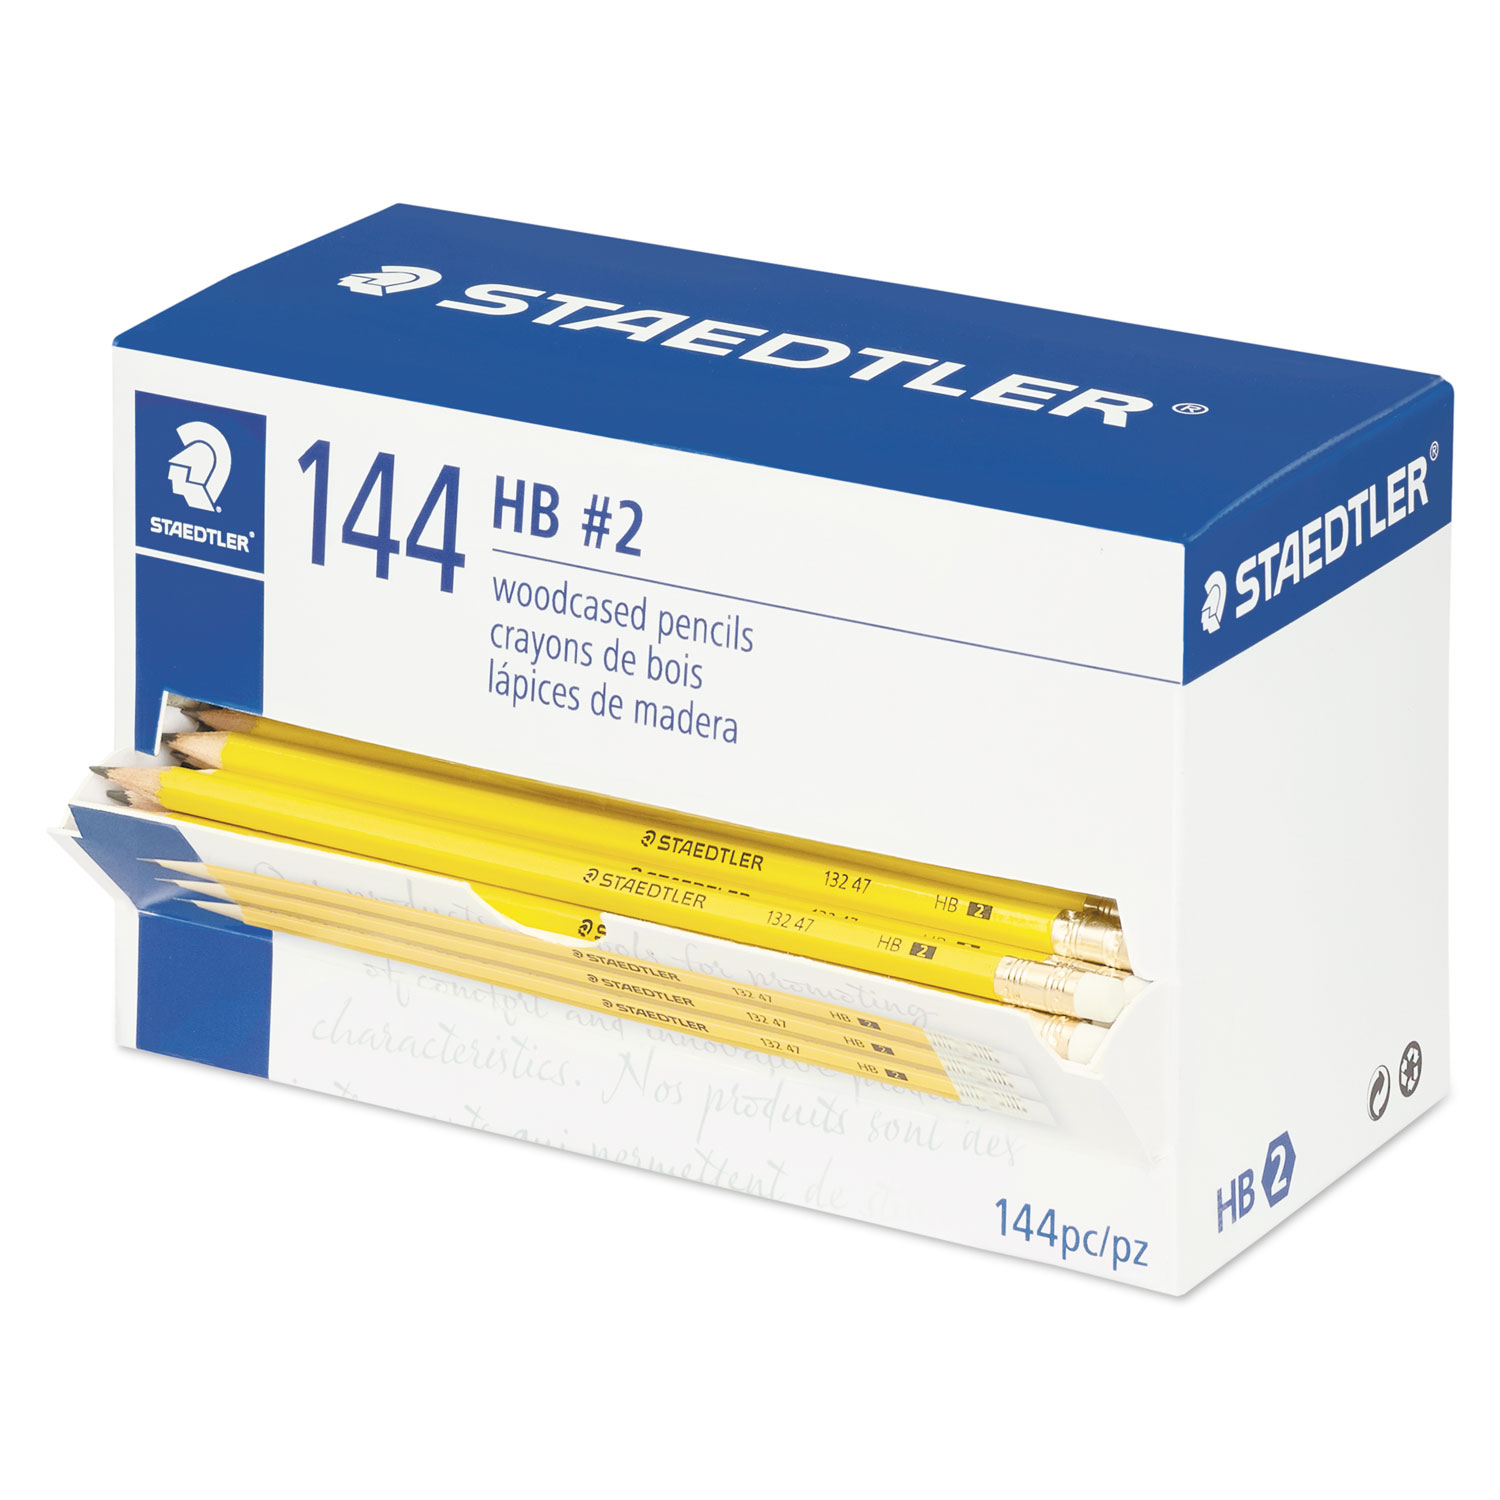  Staedtler 13247C48A6  TH Woodcase Pencil, HB (#2.5), Black Lead, Yellow Barrel, 144/Pack (STD13247C144A6) 